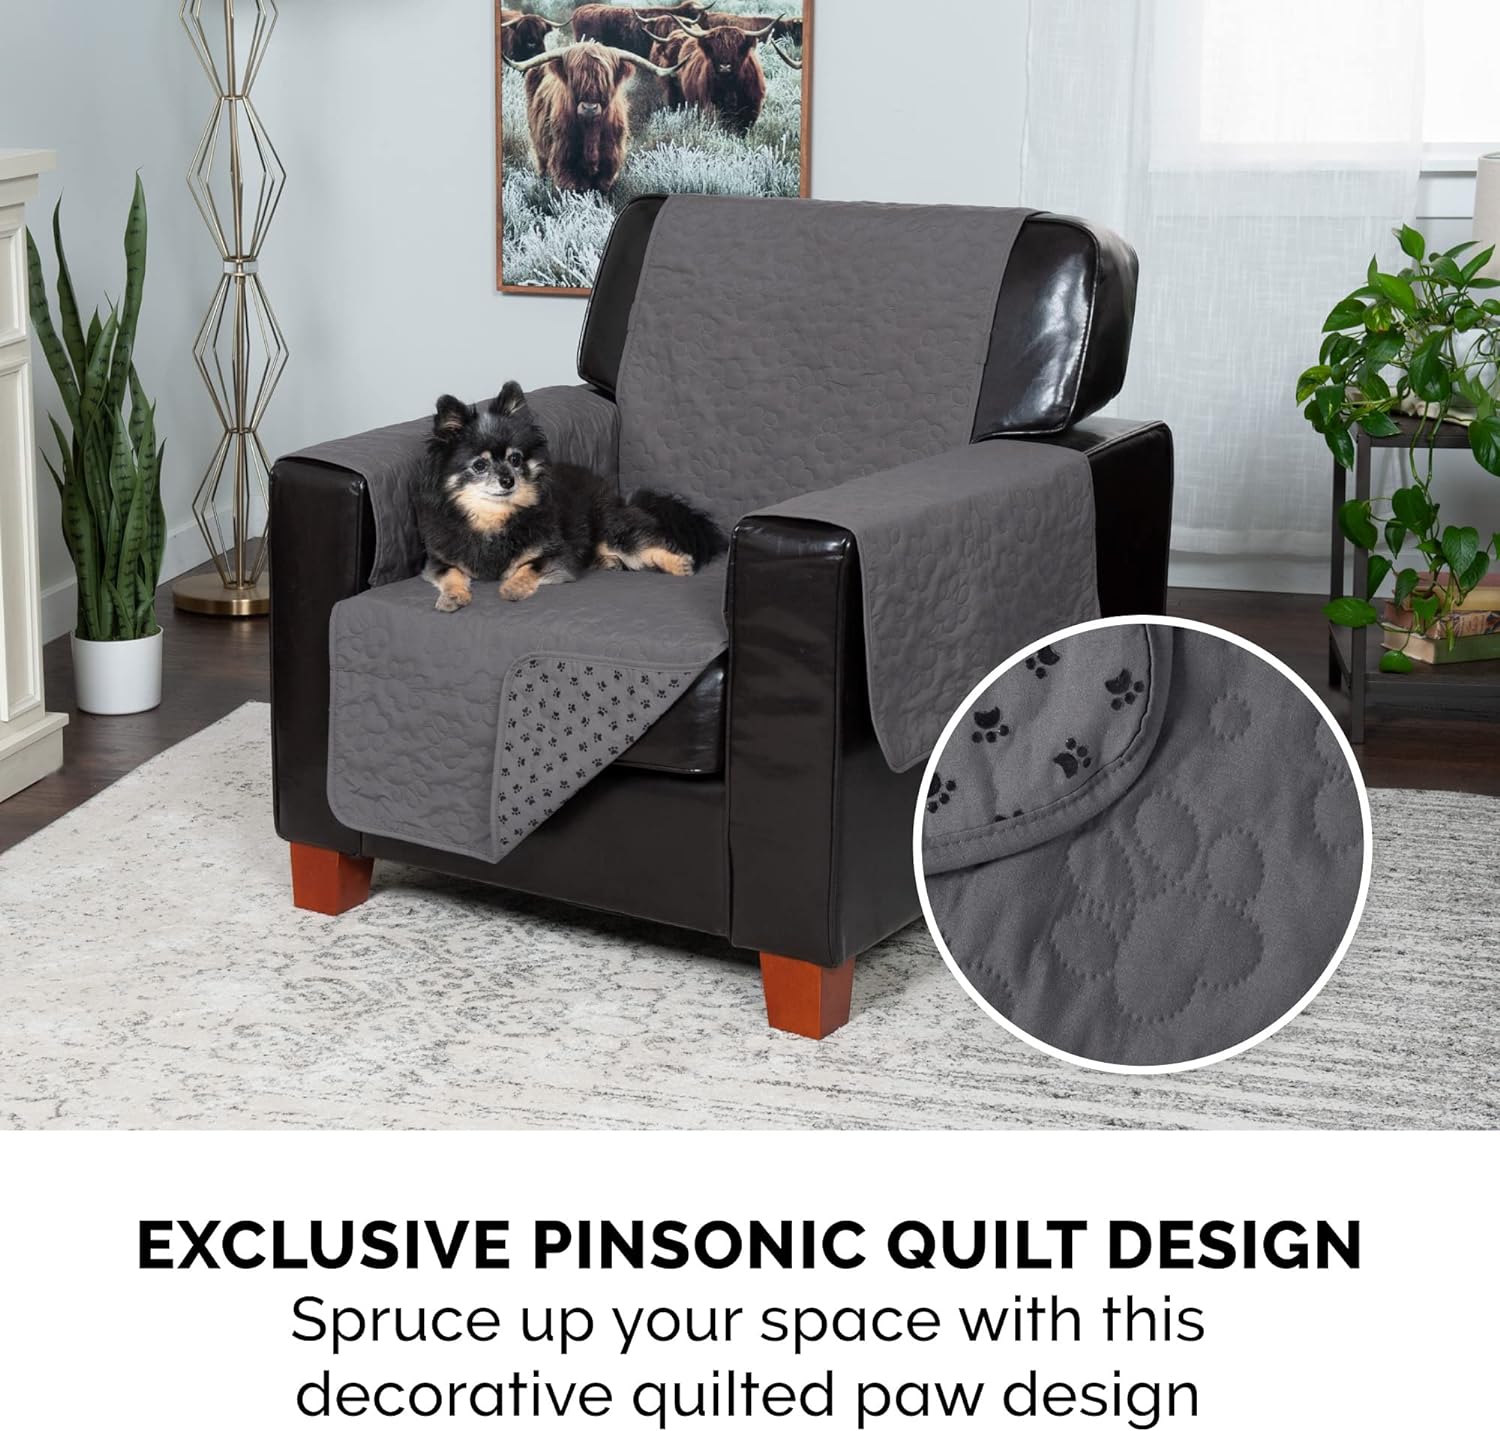 Waterproof & Non-Slip Chair Cover Protector for Dogs, Cats, & Children - Quilted Paw Print Living Room Furniture Cover - Gray, Chair